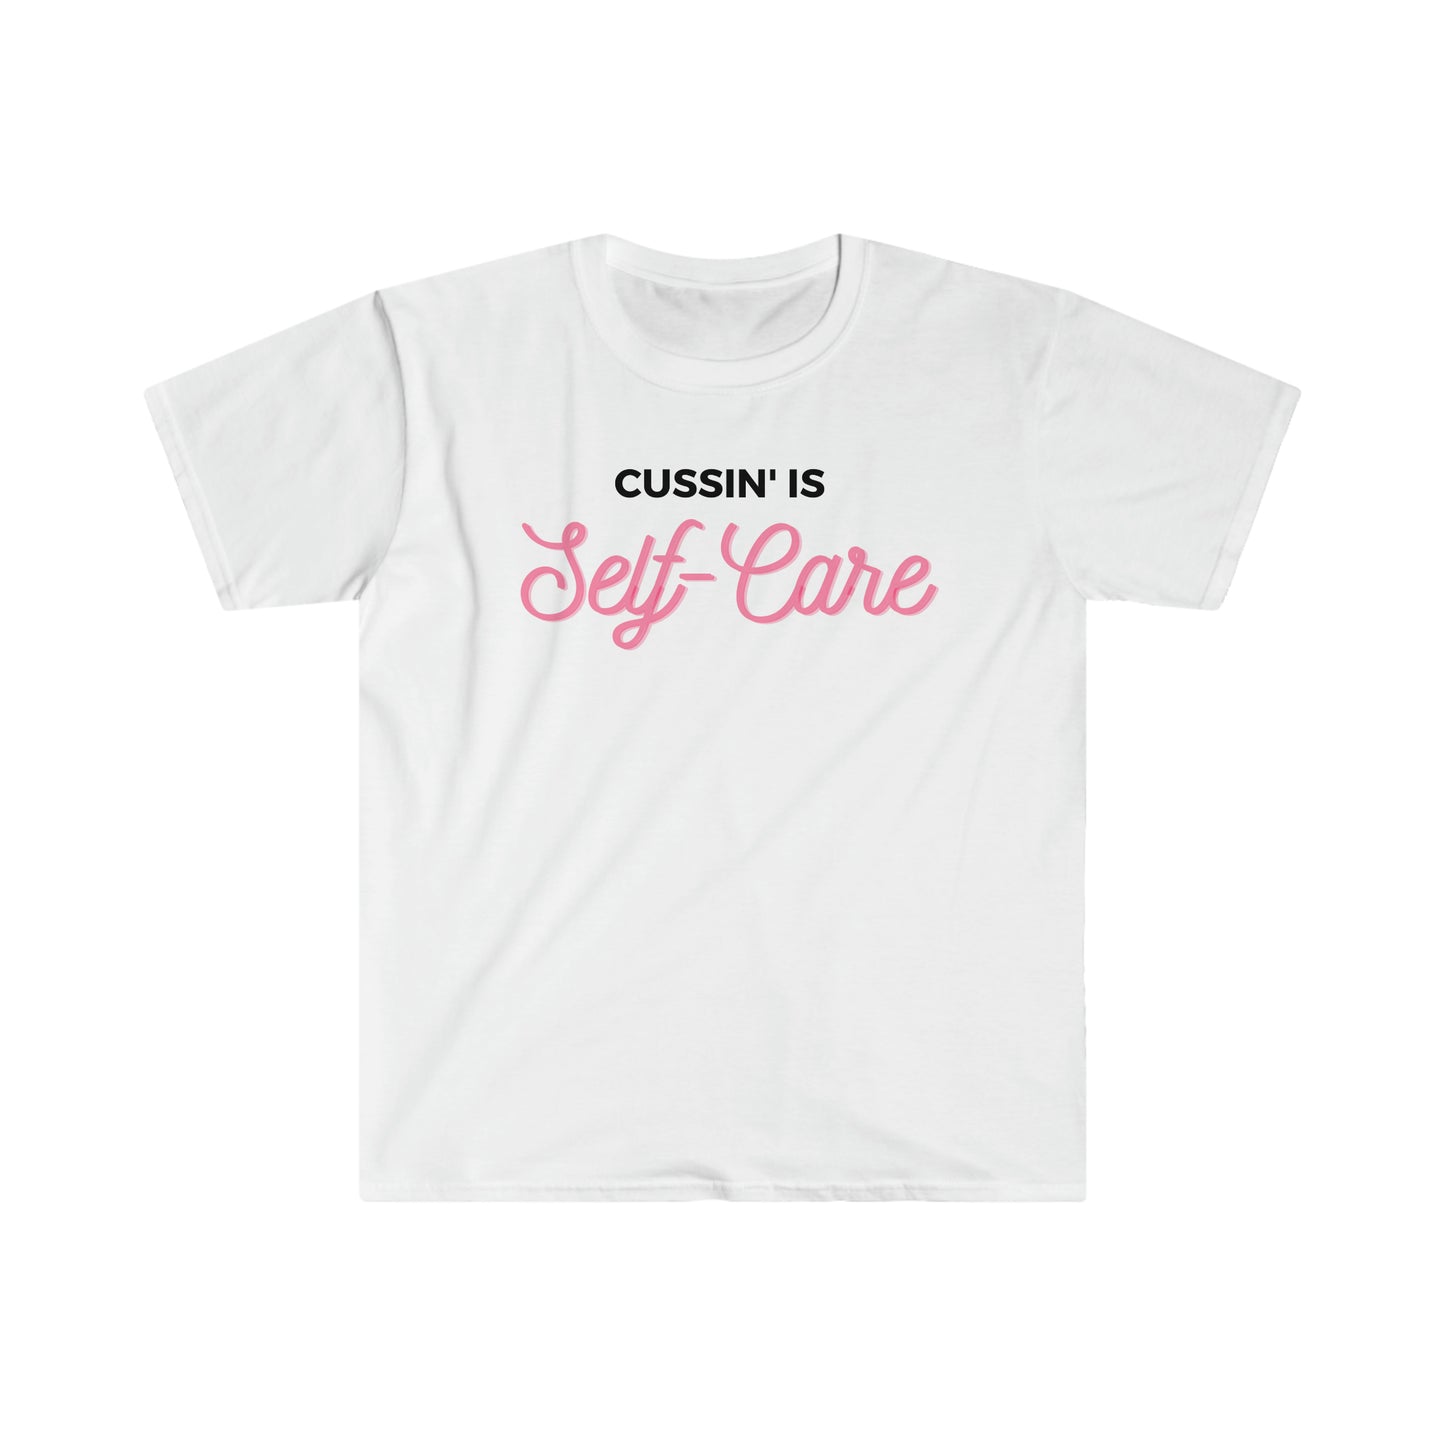 Cussin' is Self-Care - Unisex Softstyle T-Shirt